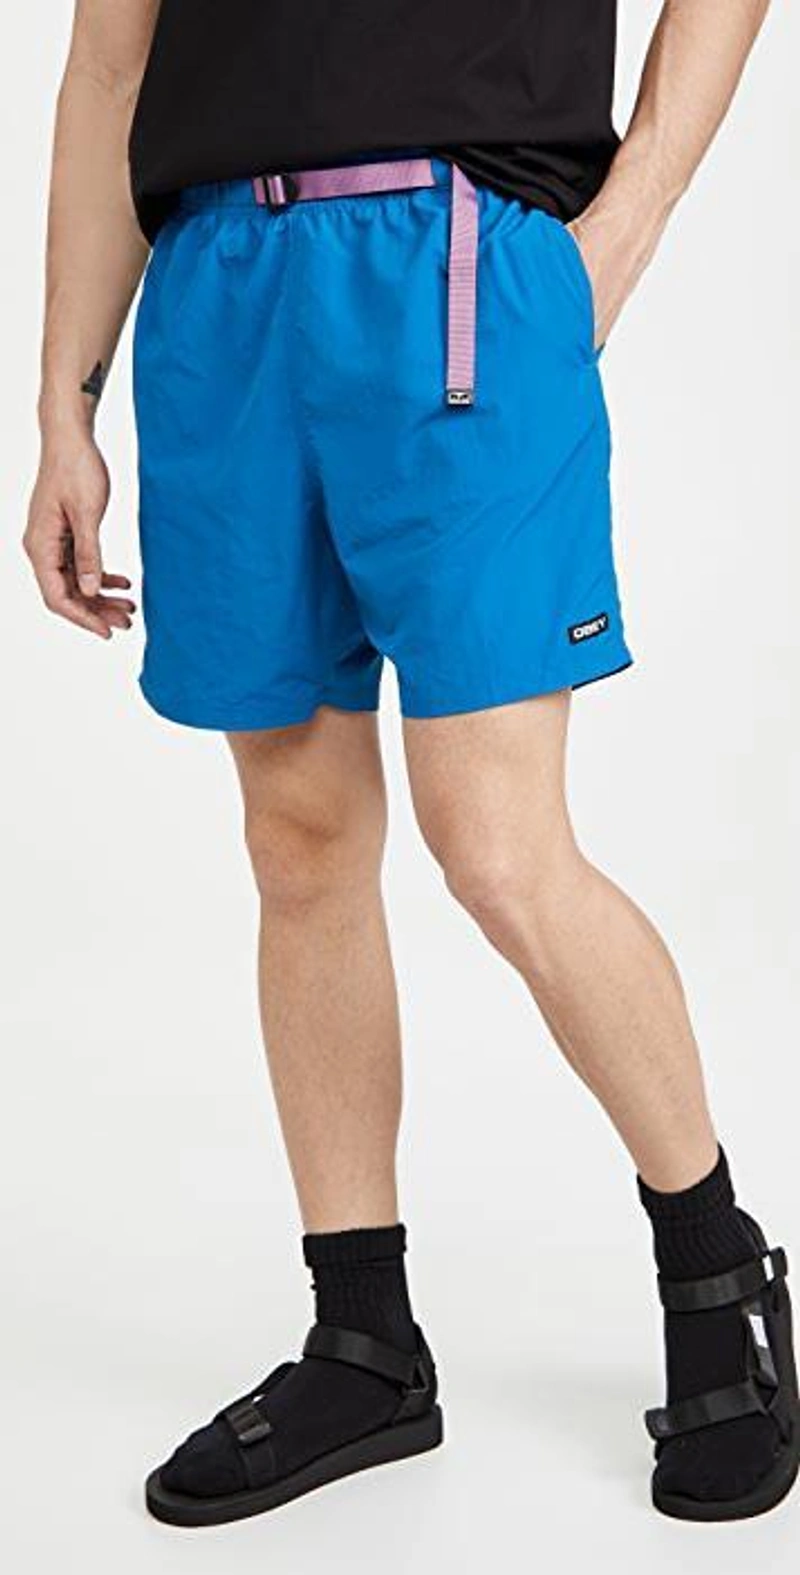 shopbop.com's Posts | 搭配: Obey Ideals Easy Relaxed Fit Trek Shorts In Blue Beat；Greats Royale Sneaker In White